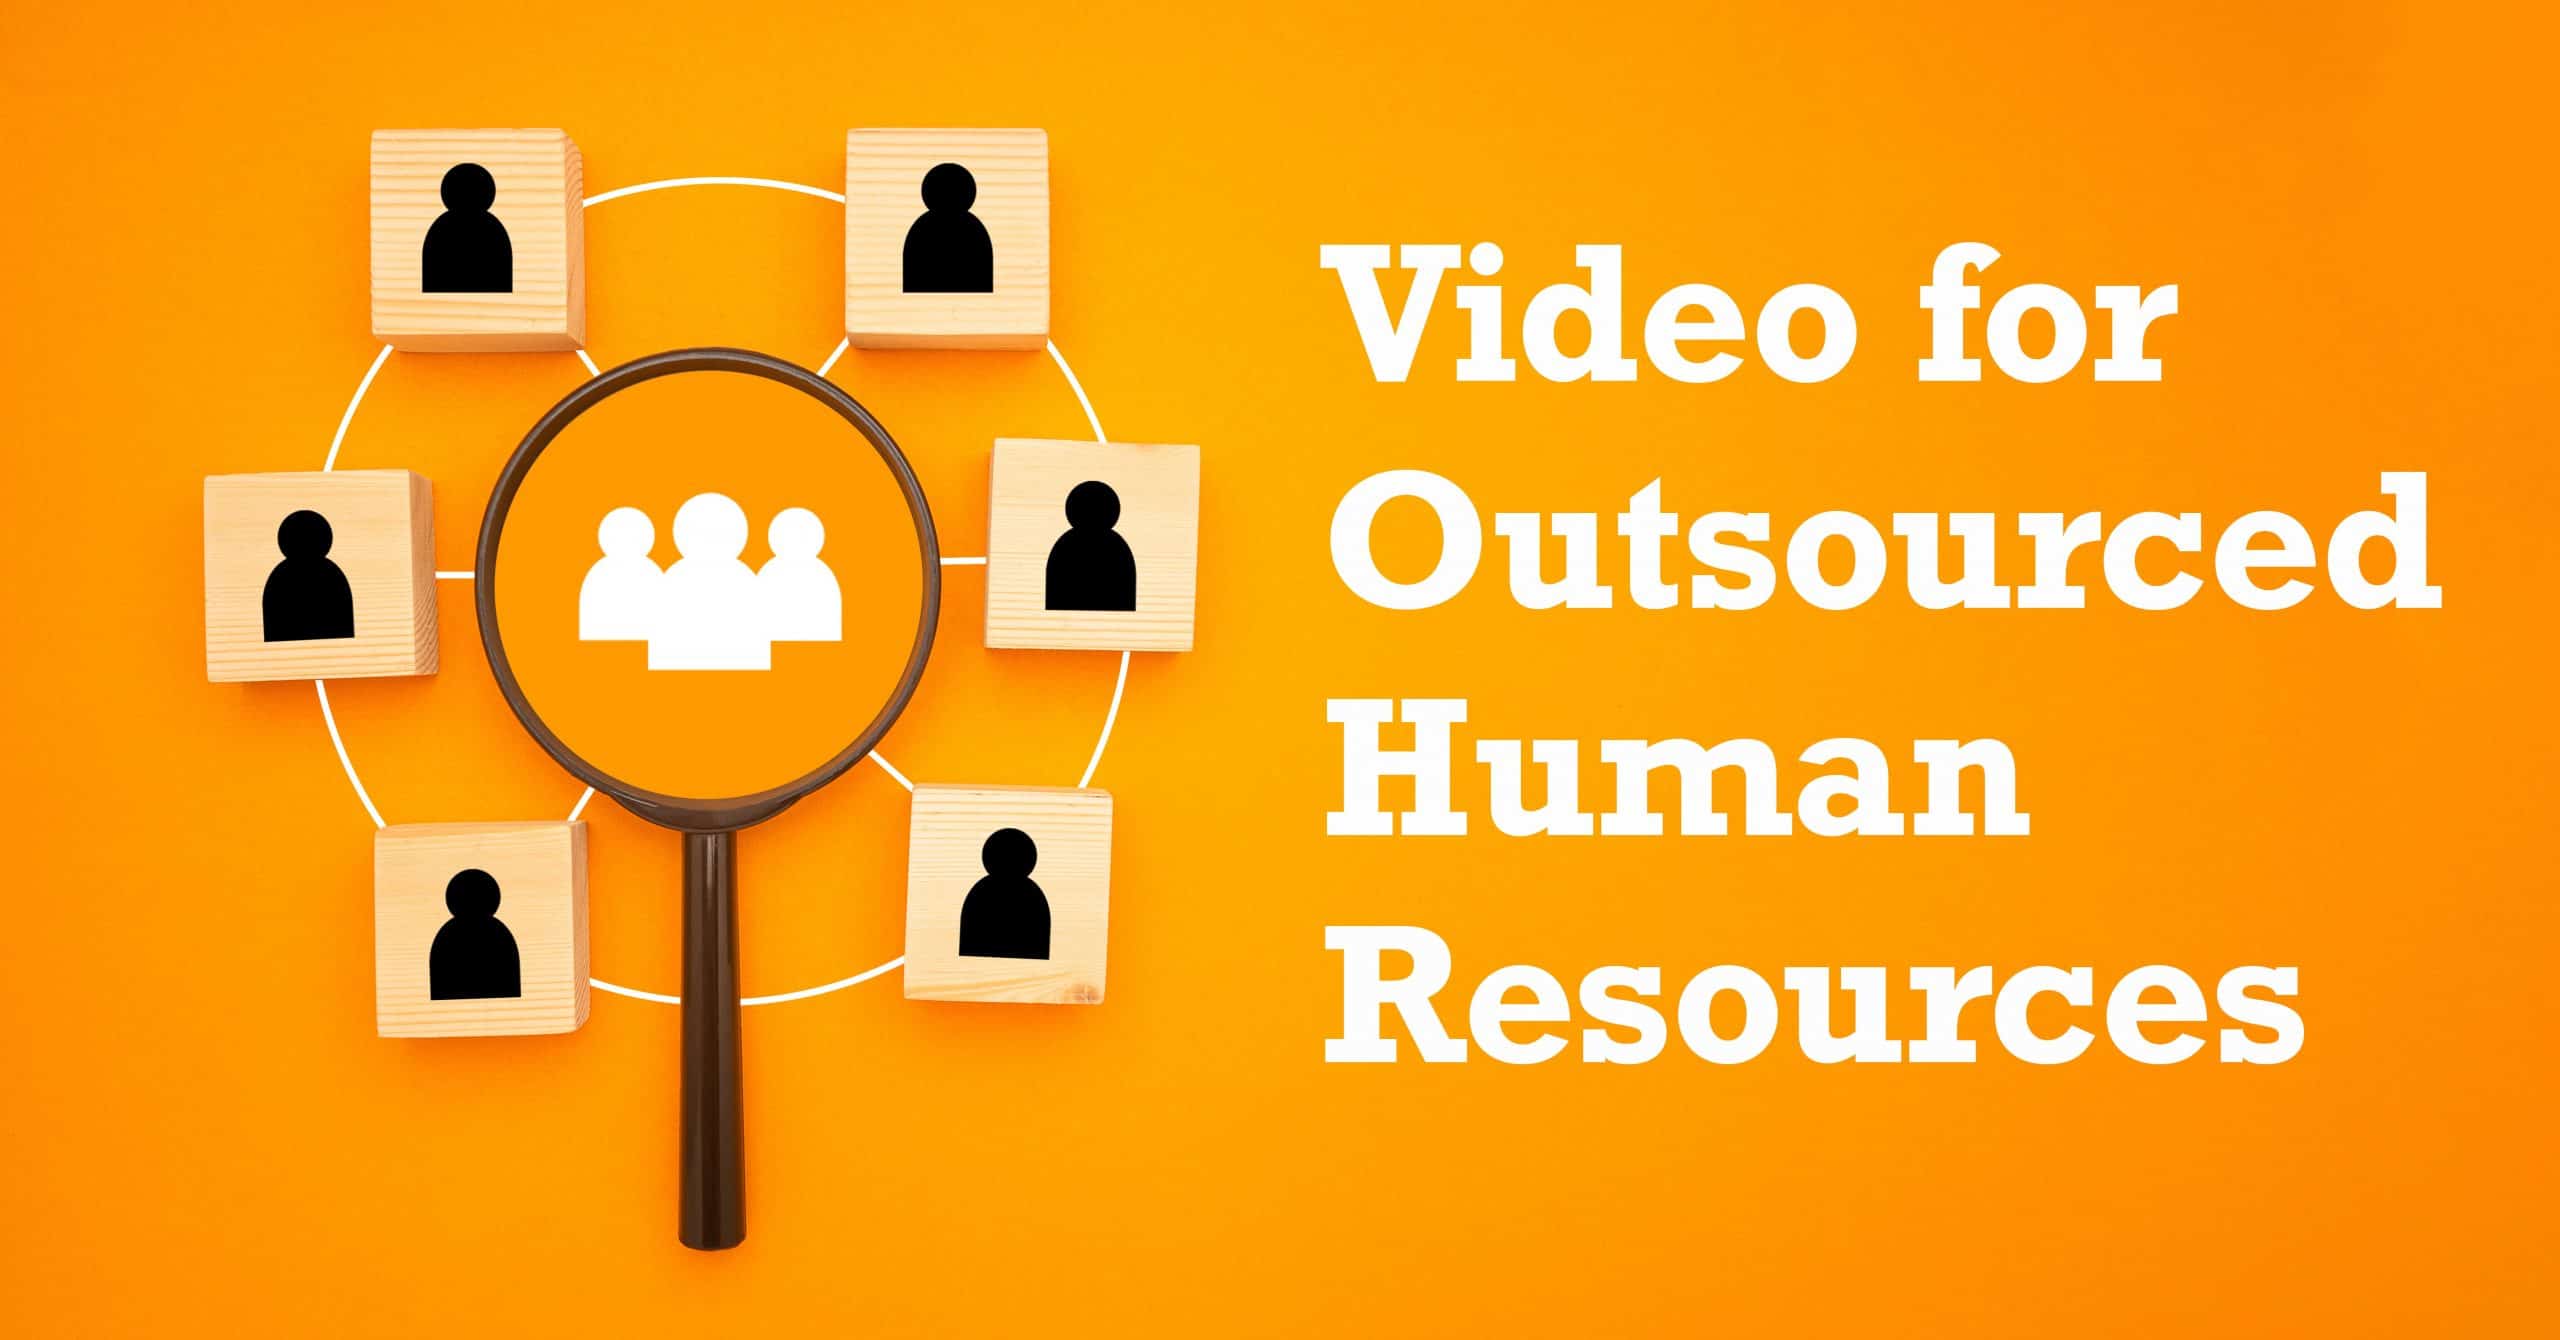 Image of person icons surrounding a magnifying glass on an orange background with the words "video for outsourced HR"